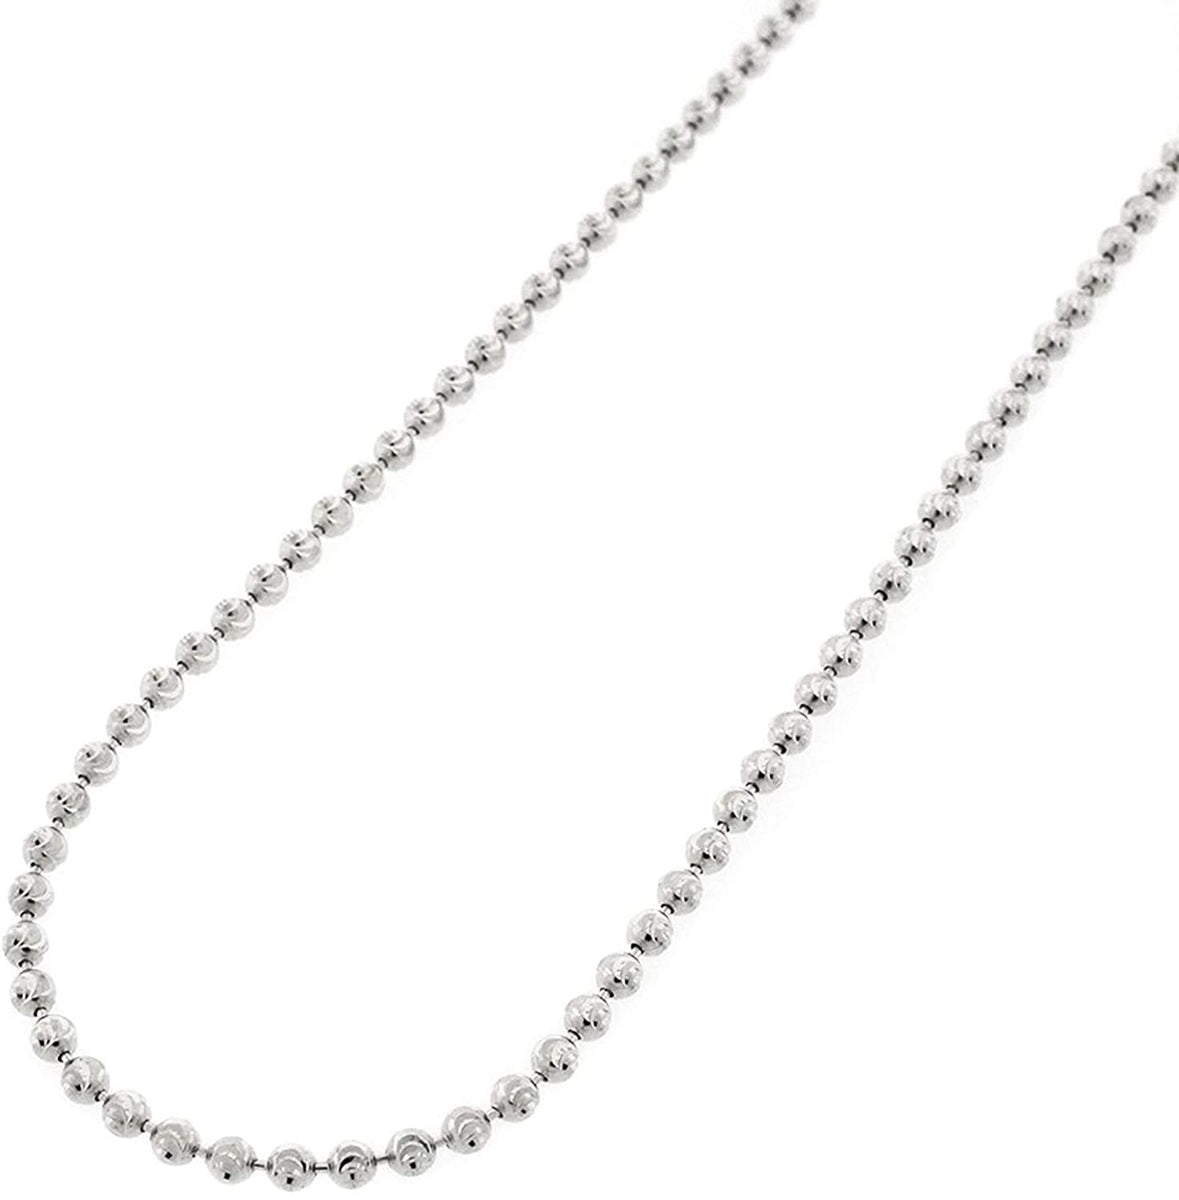 Ball Moon Bead Chain 2.5mm Necklace Black Rhodium Over Real 925 Sterling  Silver